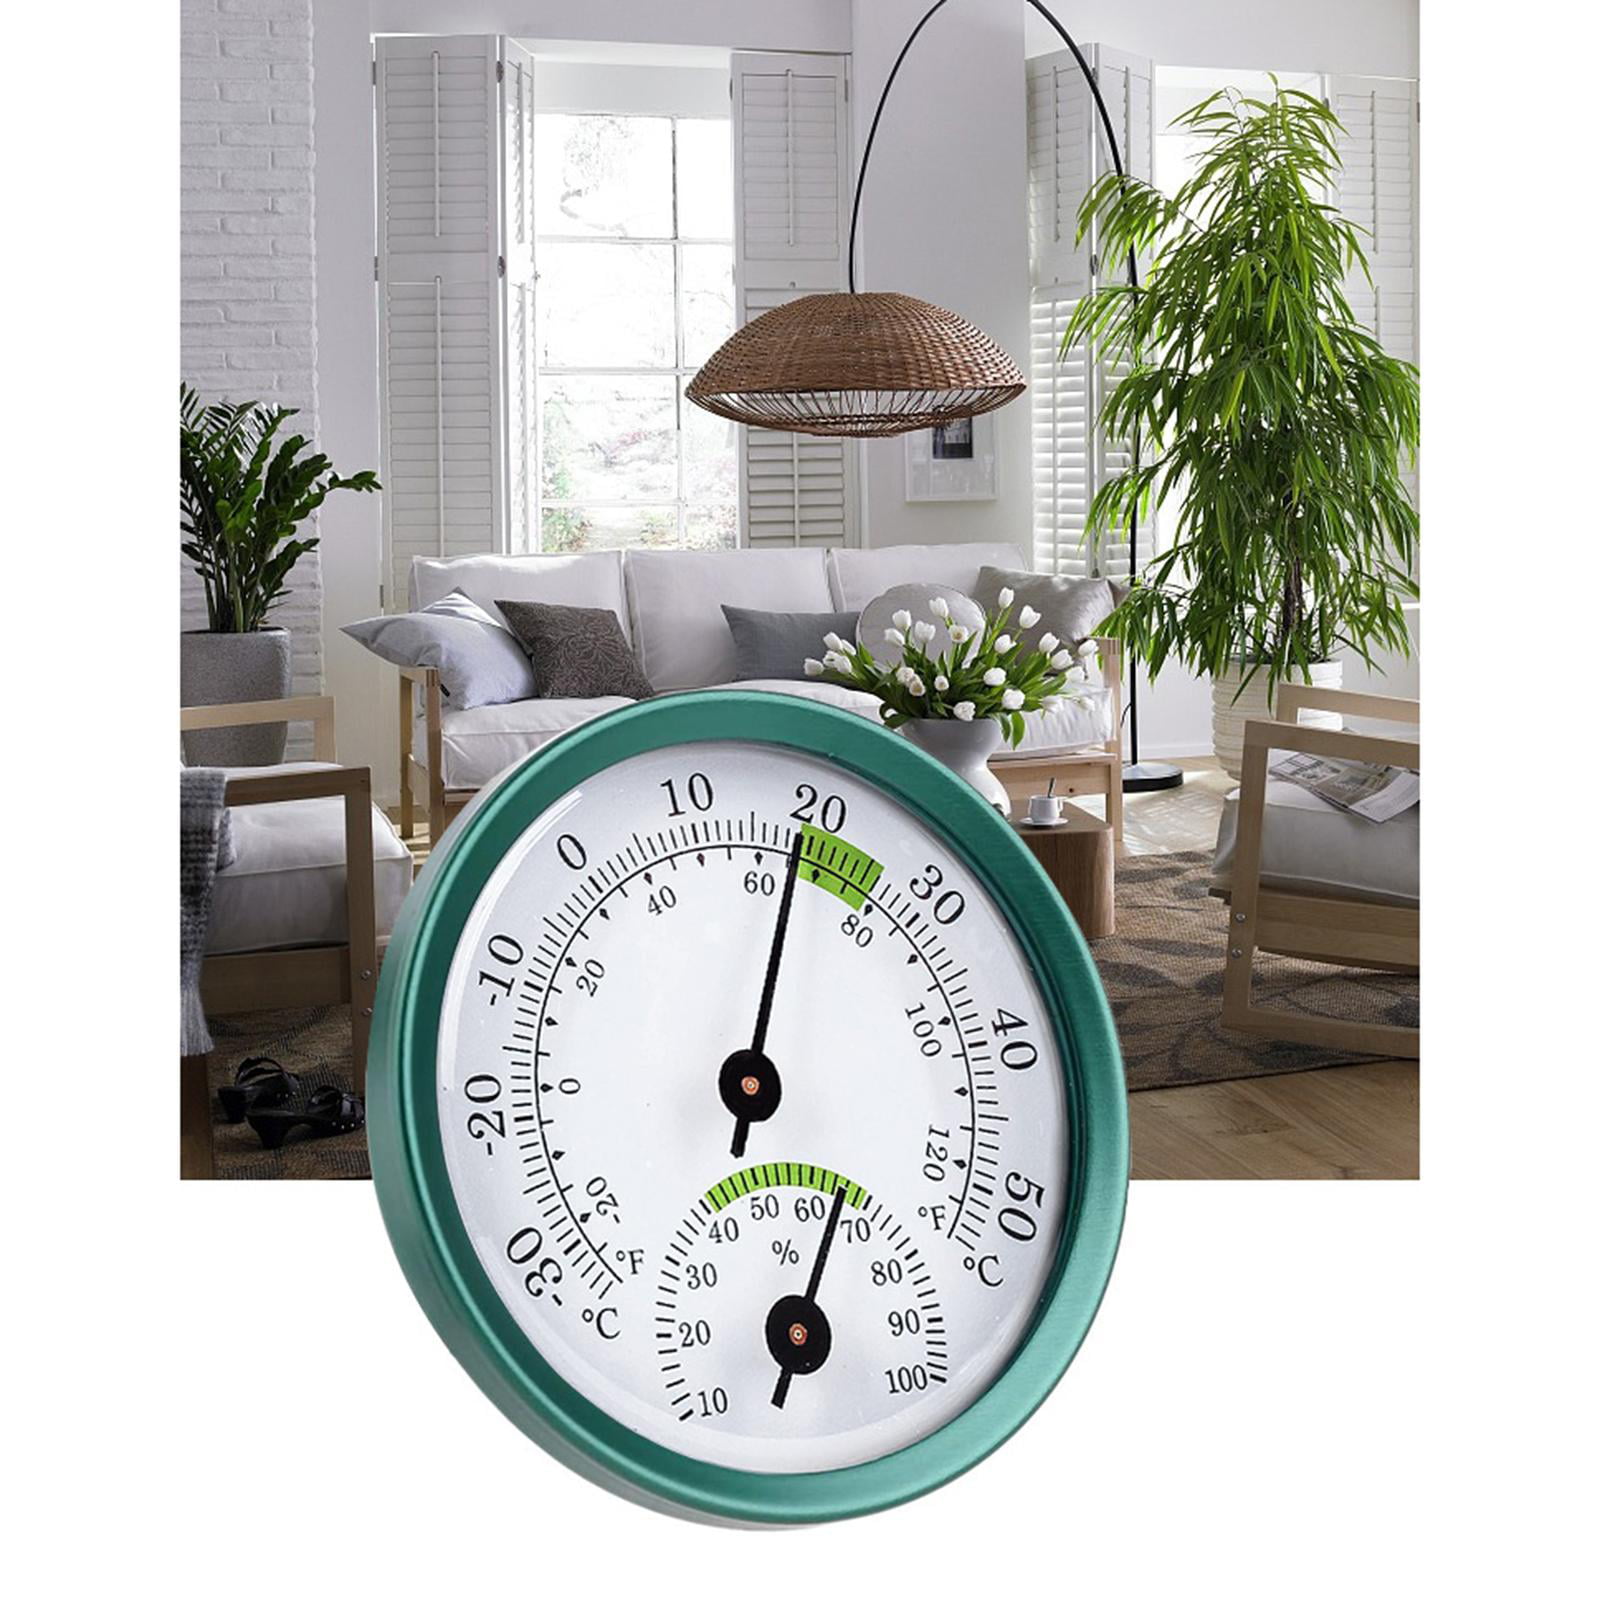 Wang Hang Analog Indoor Outdoor Thermometer Hygrometer Humidity Gauge  Temperature Monitor Hanging & Stand No battery needed - AliExpress